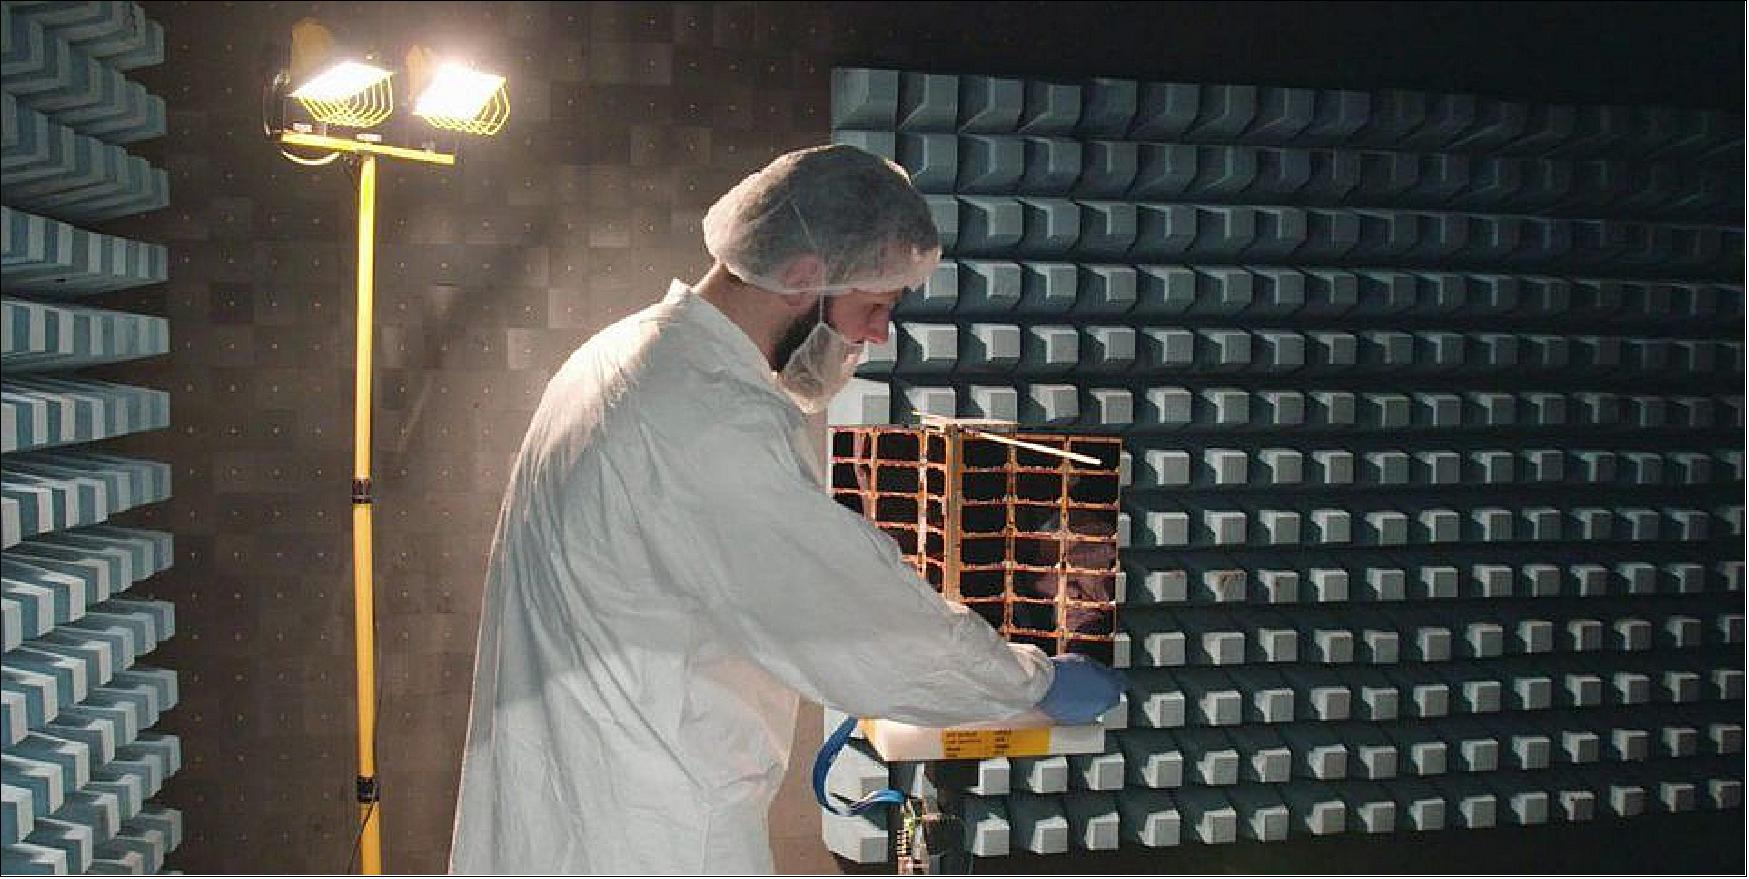 Figure 16: A Spire satellite undergoes testing in a room optimized to check for radiofrequency interference (image credit: Spire Global)